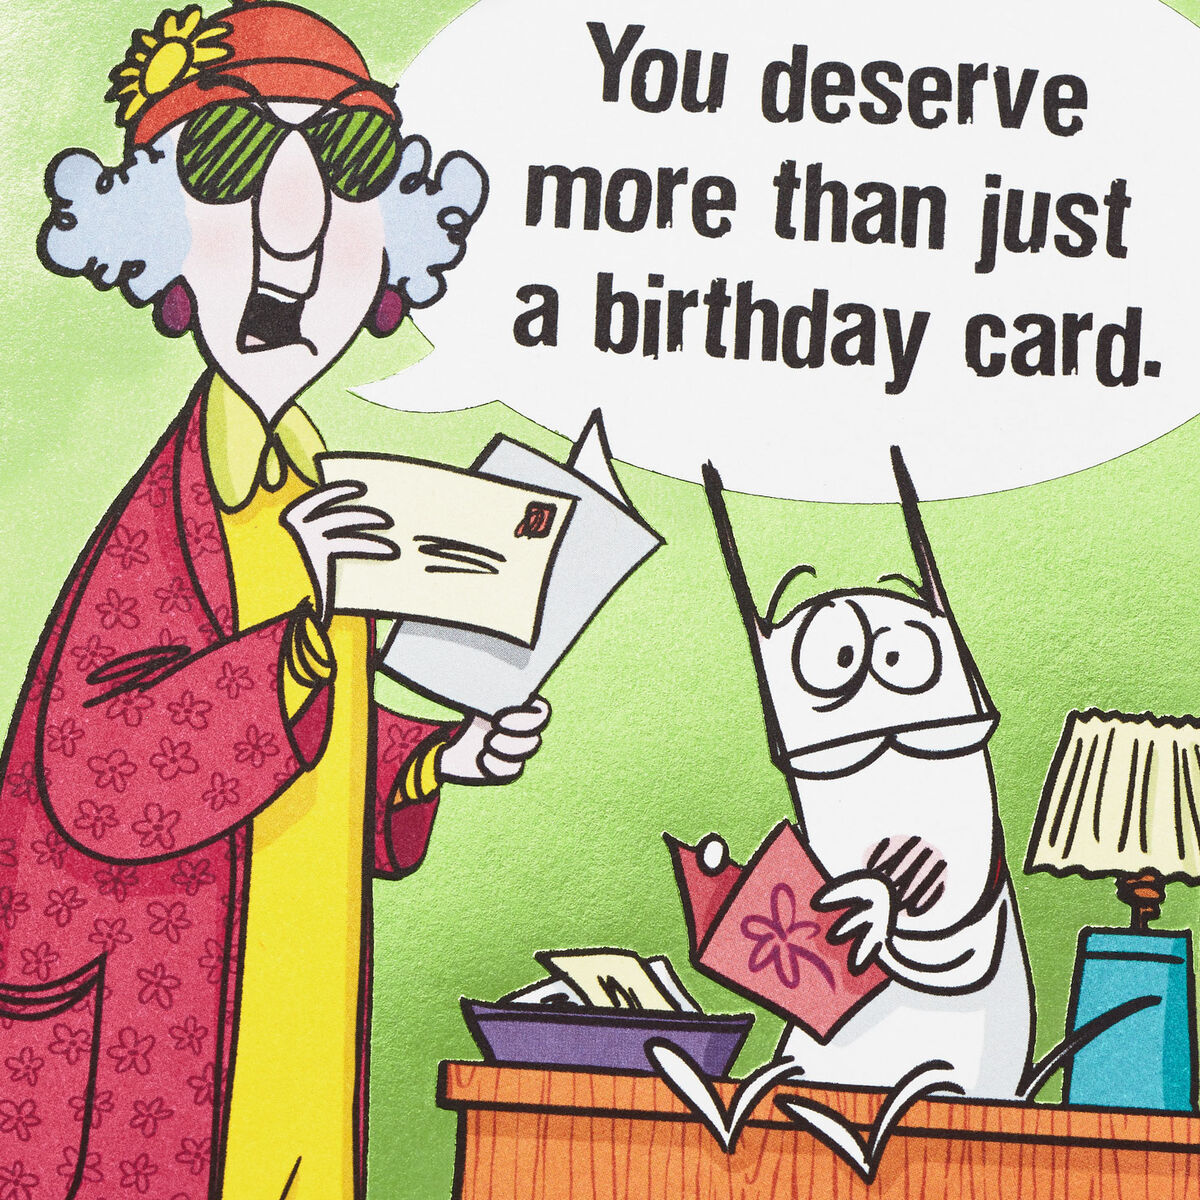 maxine-you-deserve-more-than-a-card-funny-birthday-card-greeting